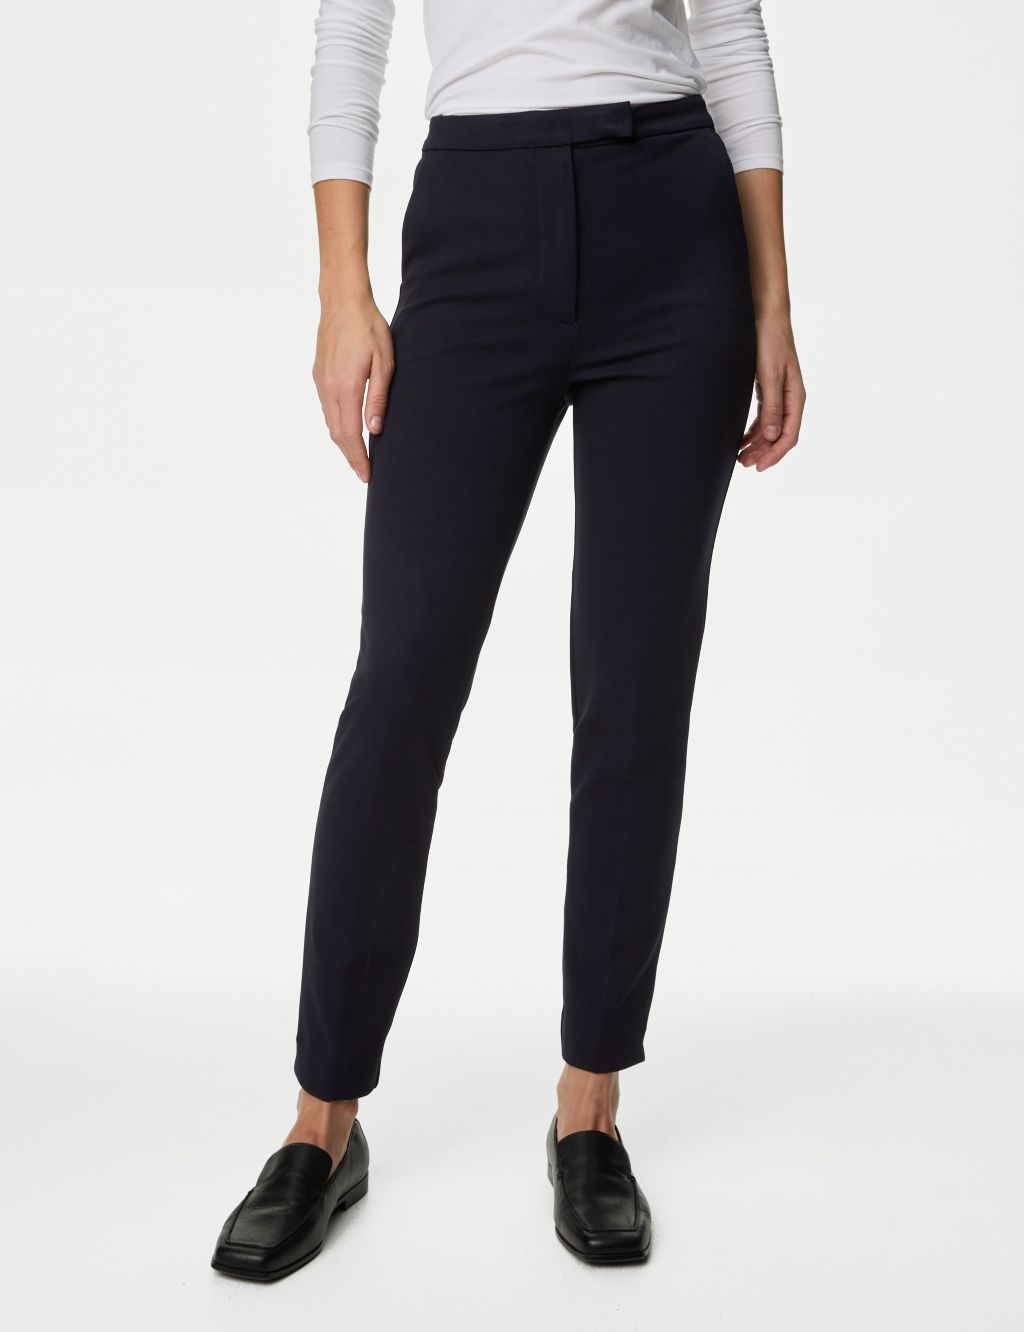 Slim Fit Ankle Grazer Trousers image 4